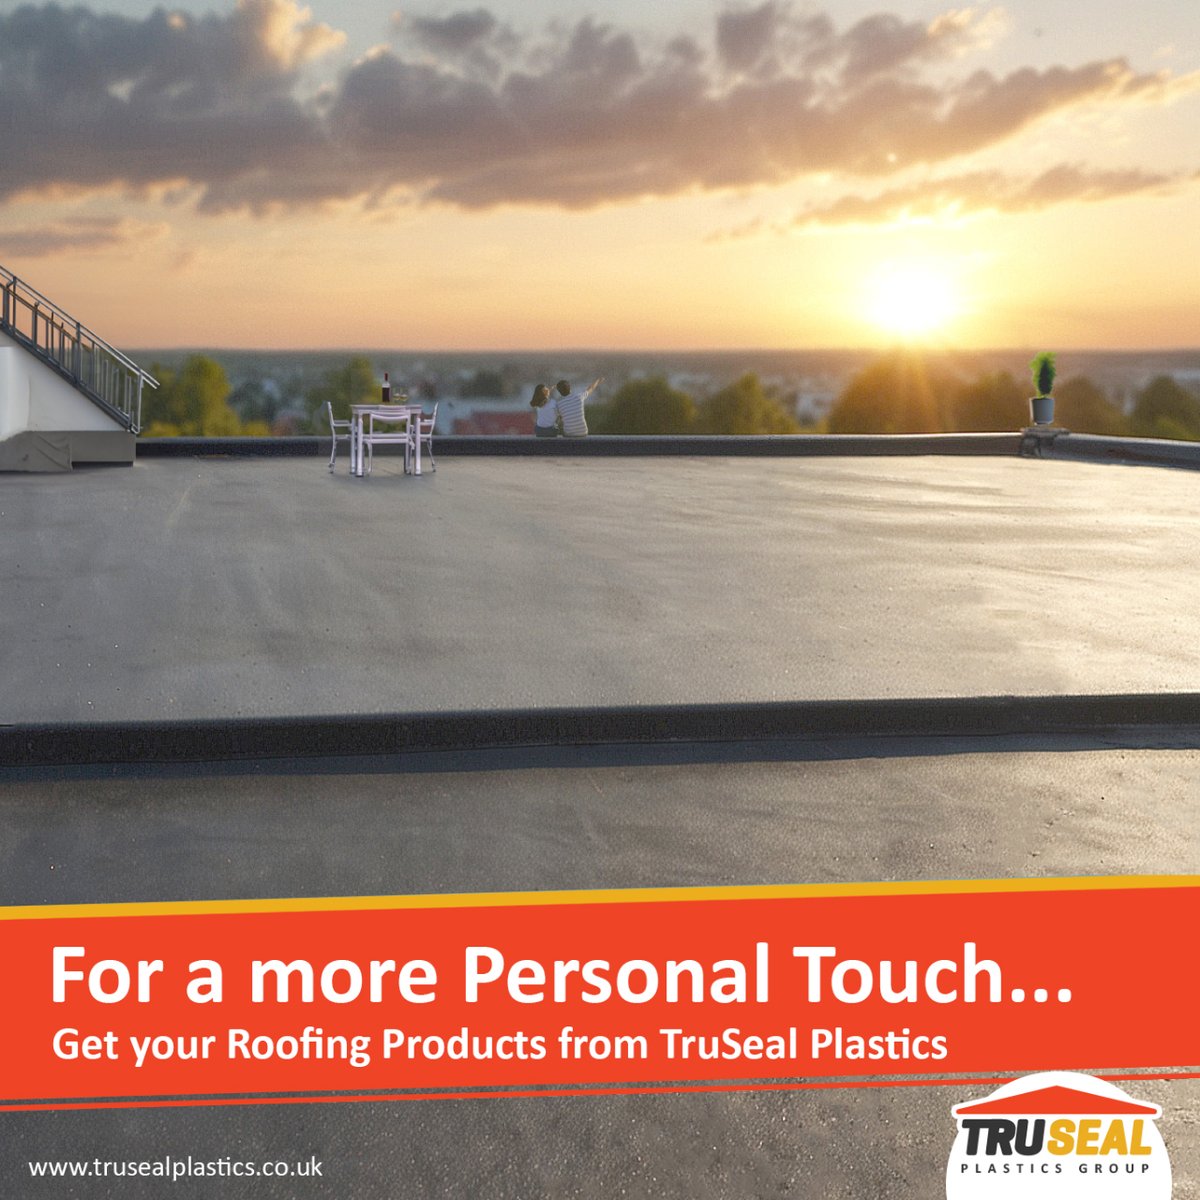 🏡👷 For a more Personal Touch... Get your Roofing Products from TruSeal Plastics.

Find your nearest Depot: trusealplastics.co.uk/depot

#rubberroofing #rubberroofinguk #roofingrubber #roofingproducts #diyuk #roofdiy #rooferslife #roofingsupplies #EPDMrubber #roofingcontractors